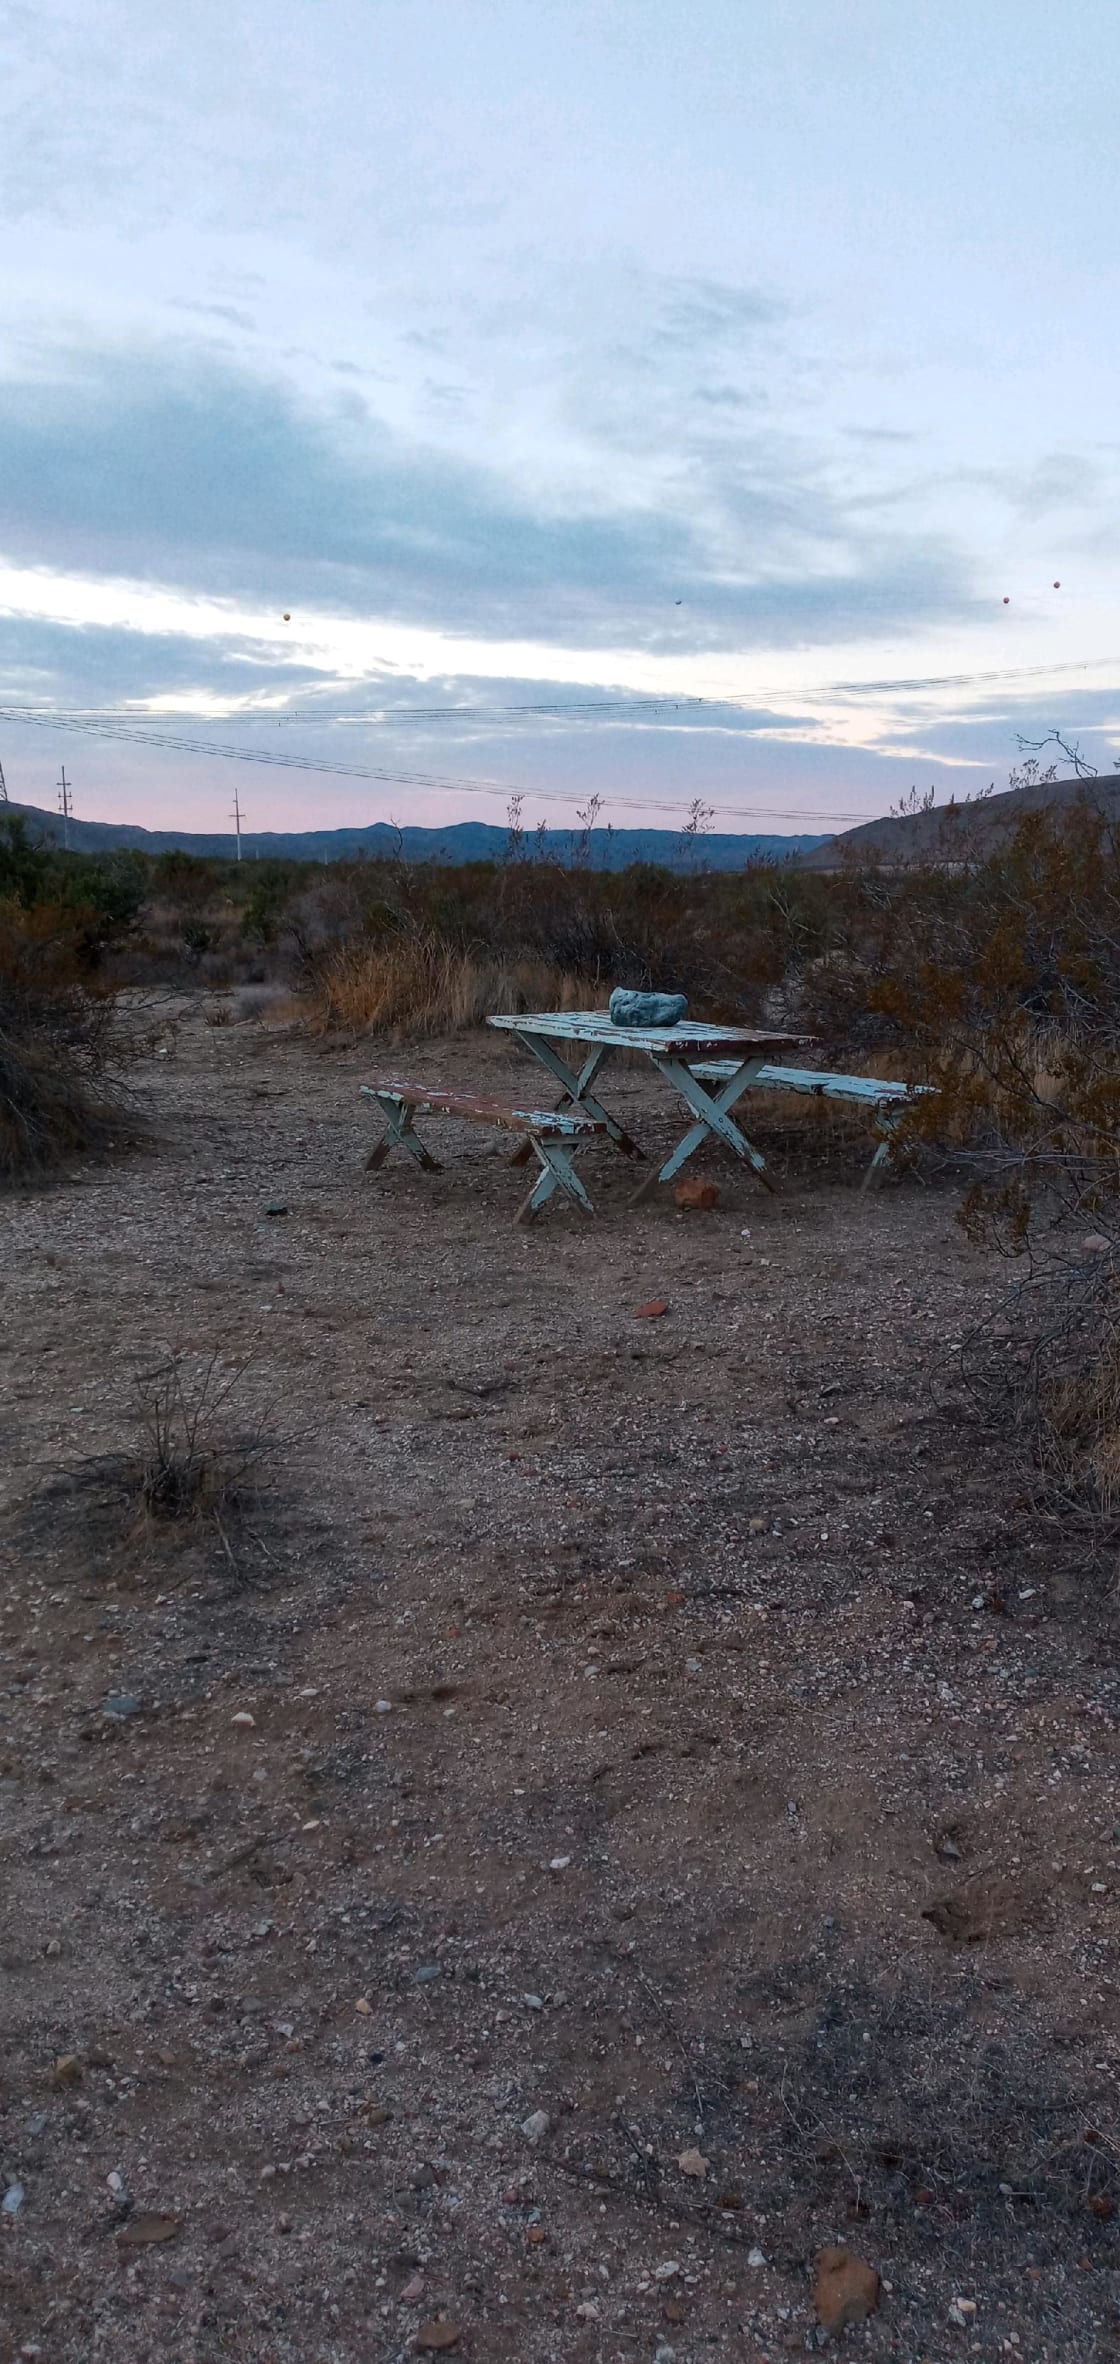 Pre-Sunrise Break-the-Fast Time of Day at Hip High Desert Peace Camp.